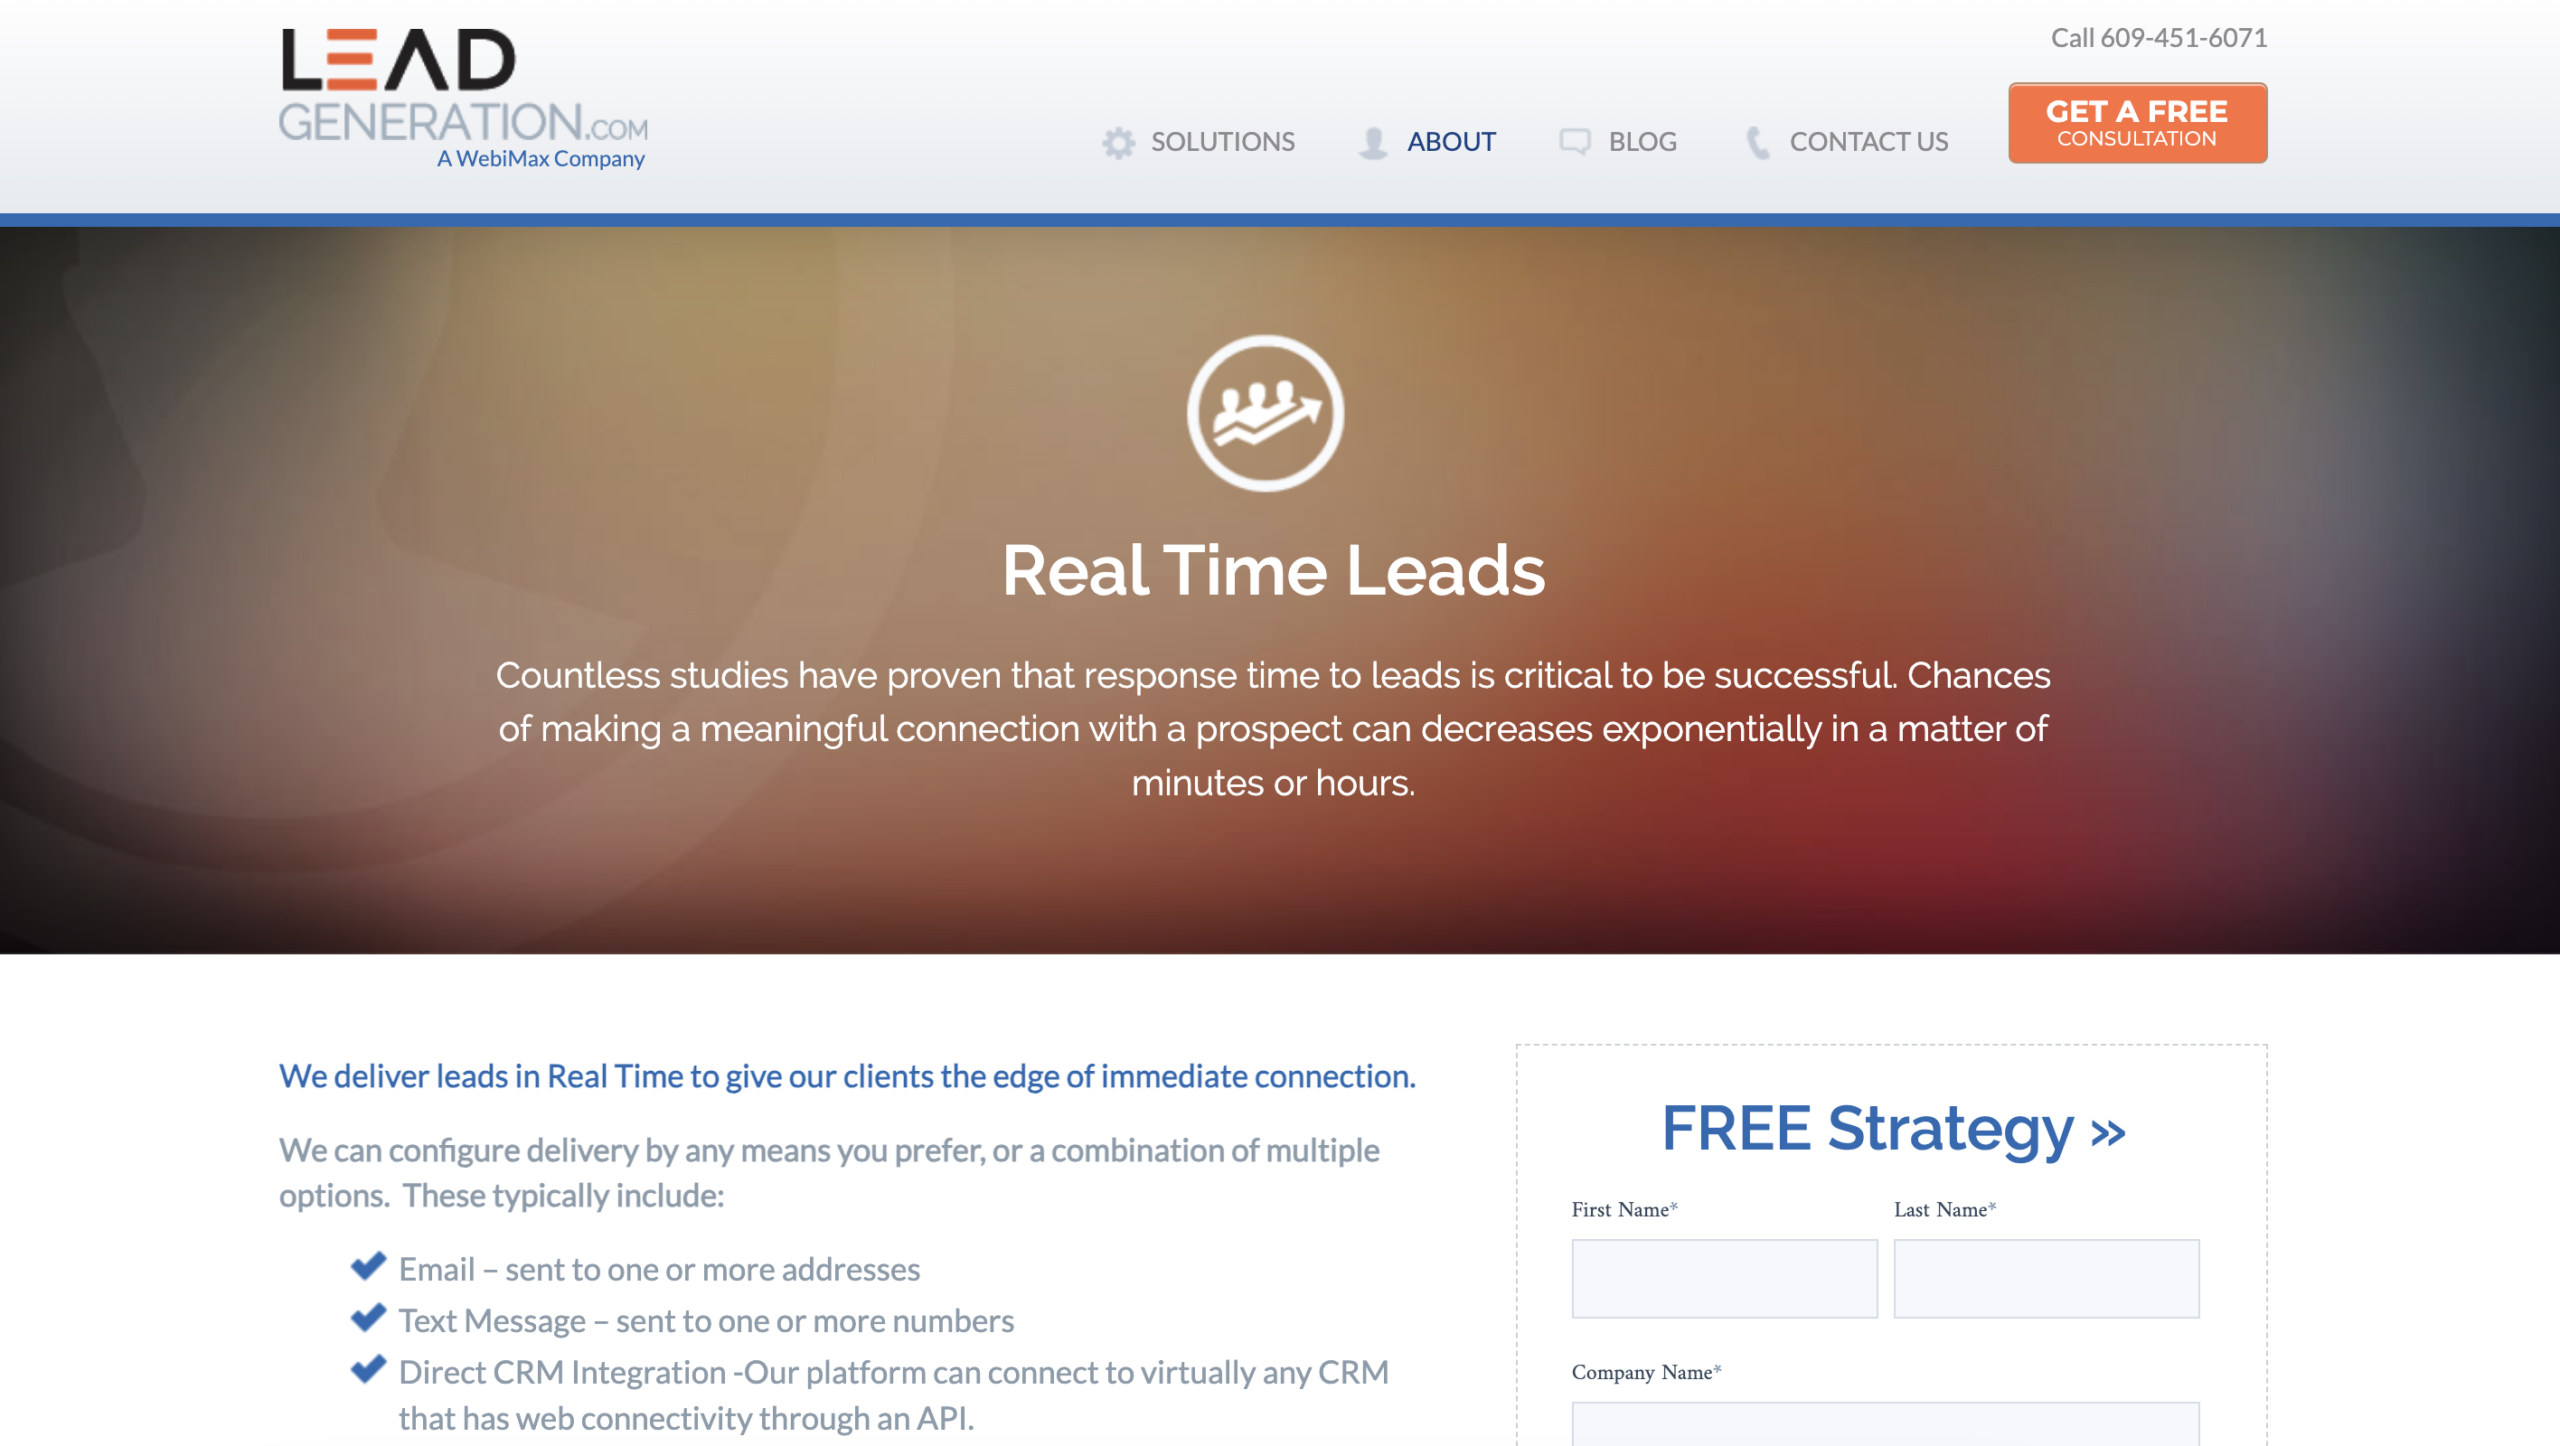 LeadGeneration.com promises real time leads.